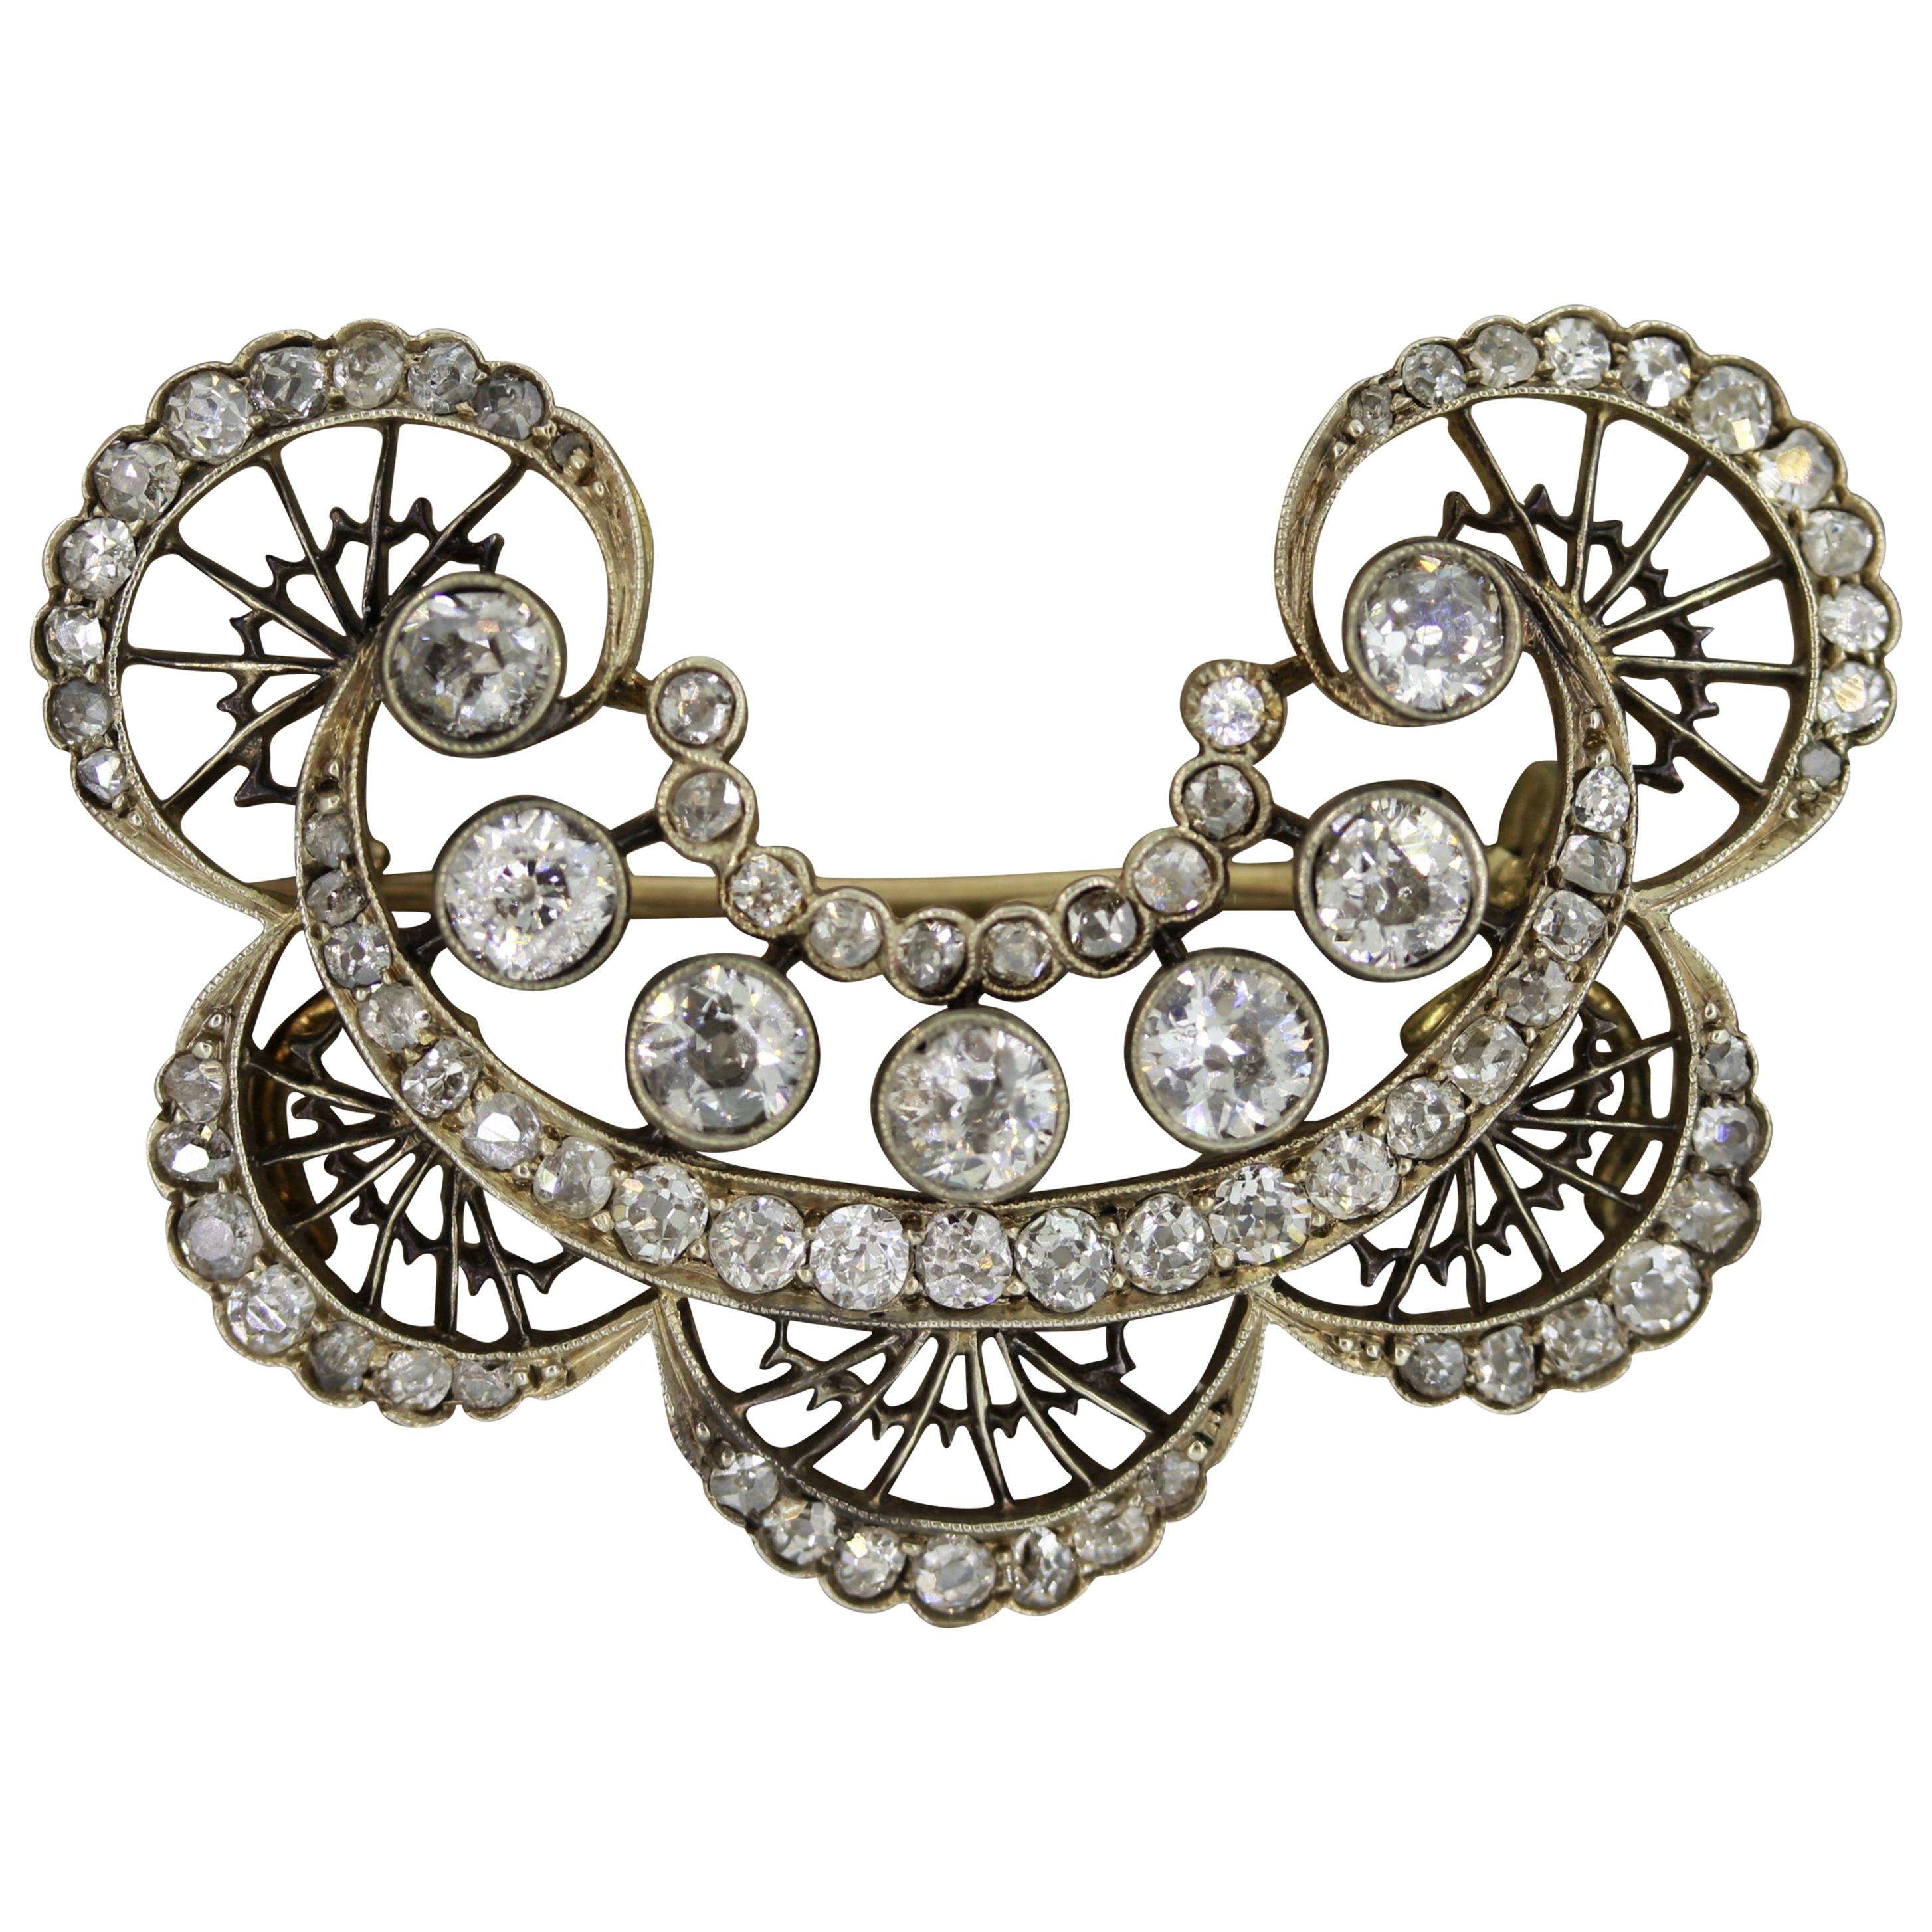 Antique Diamond Gold Silver-Topped Brooch